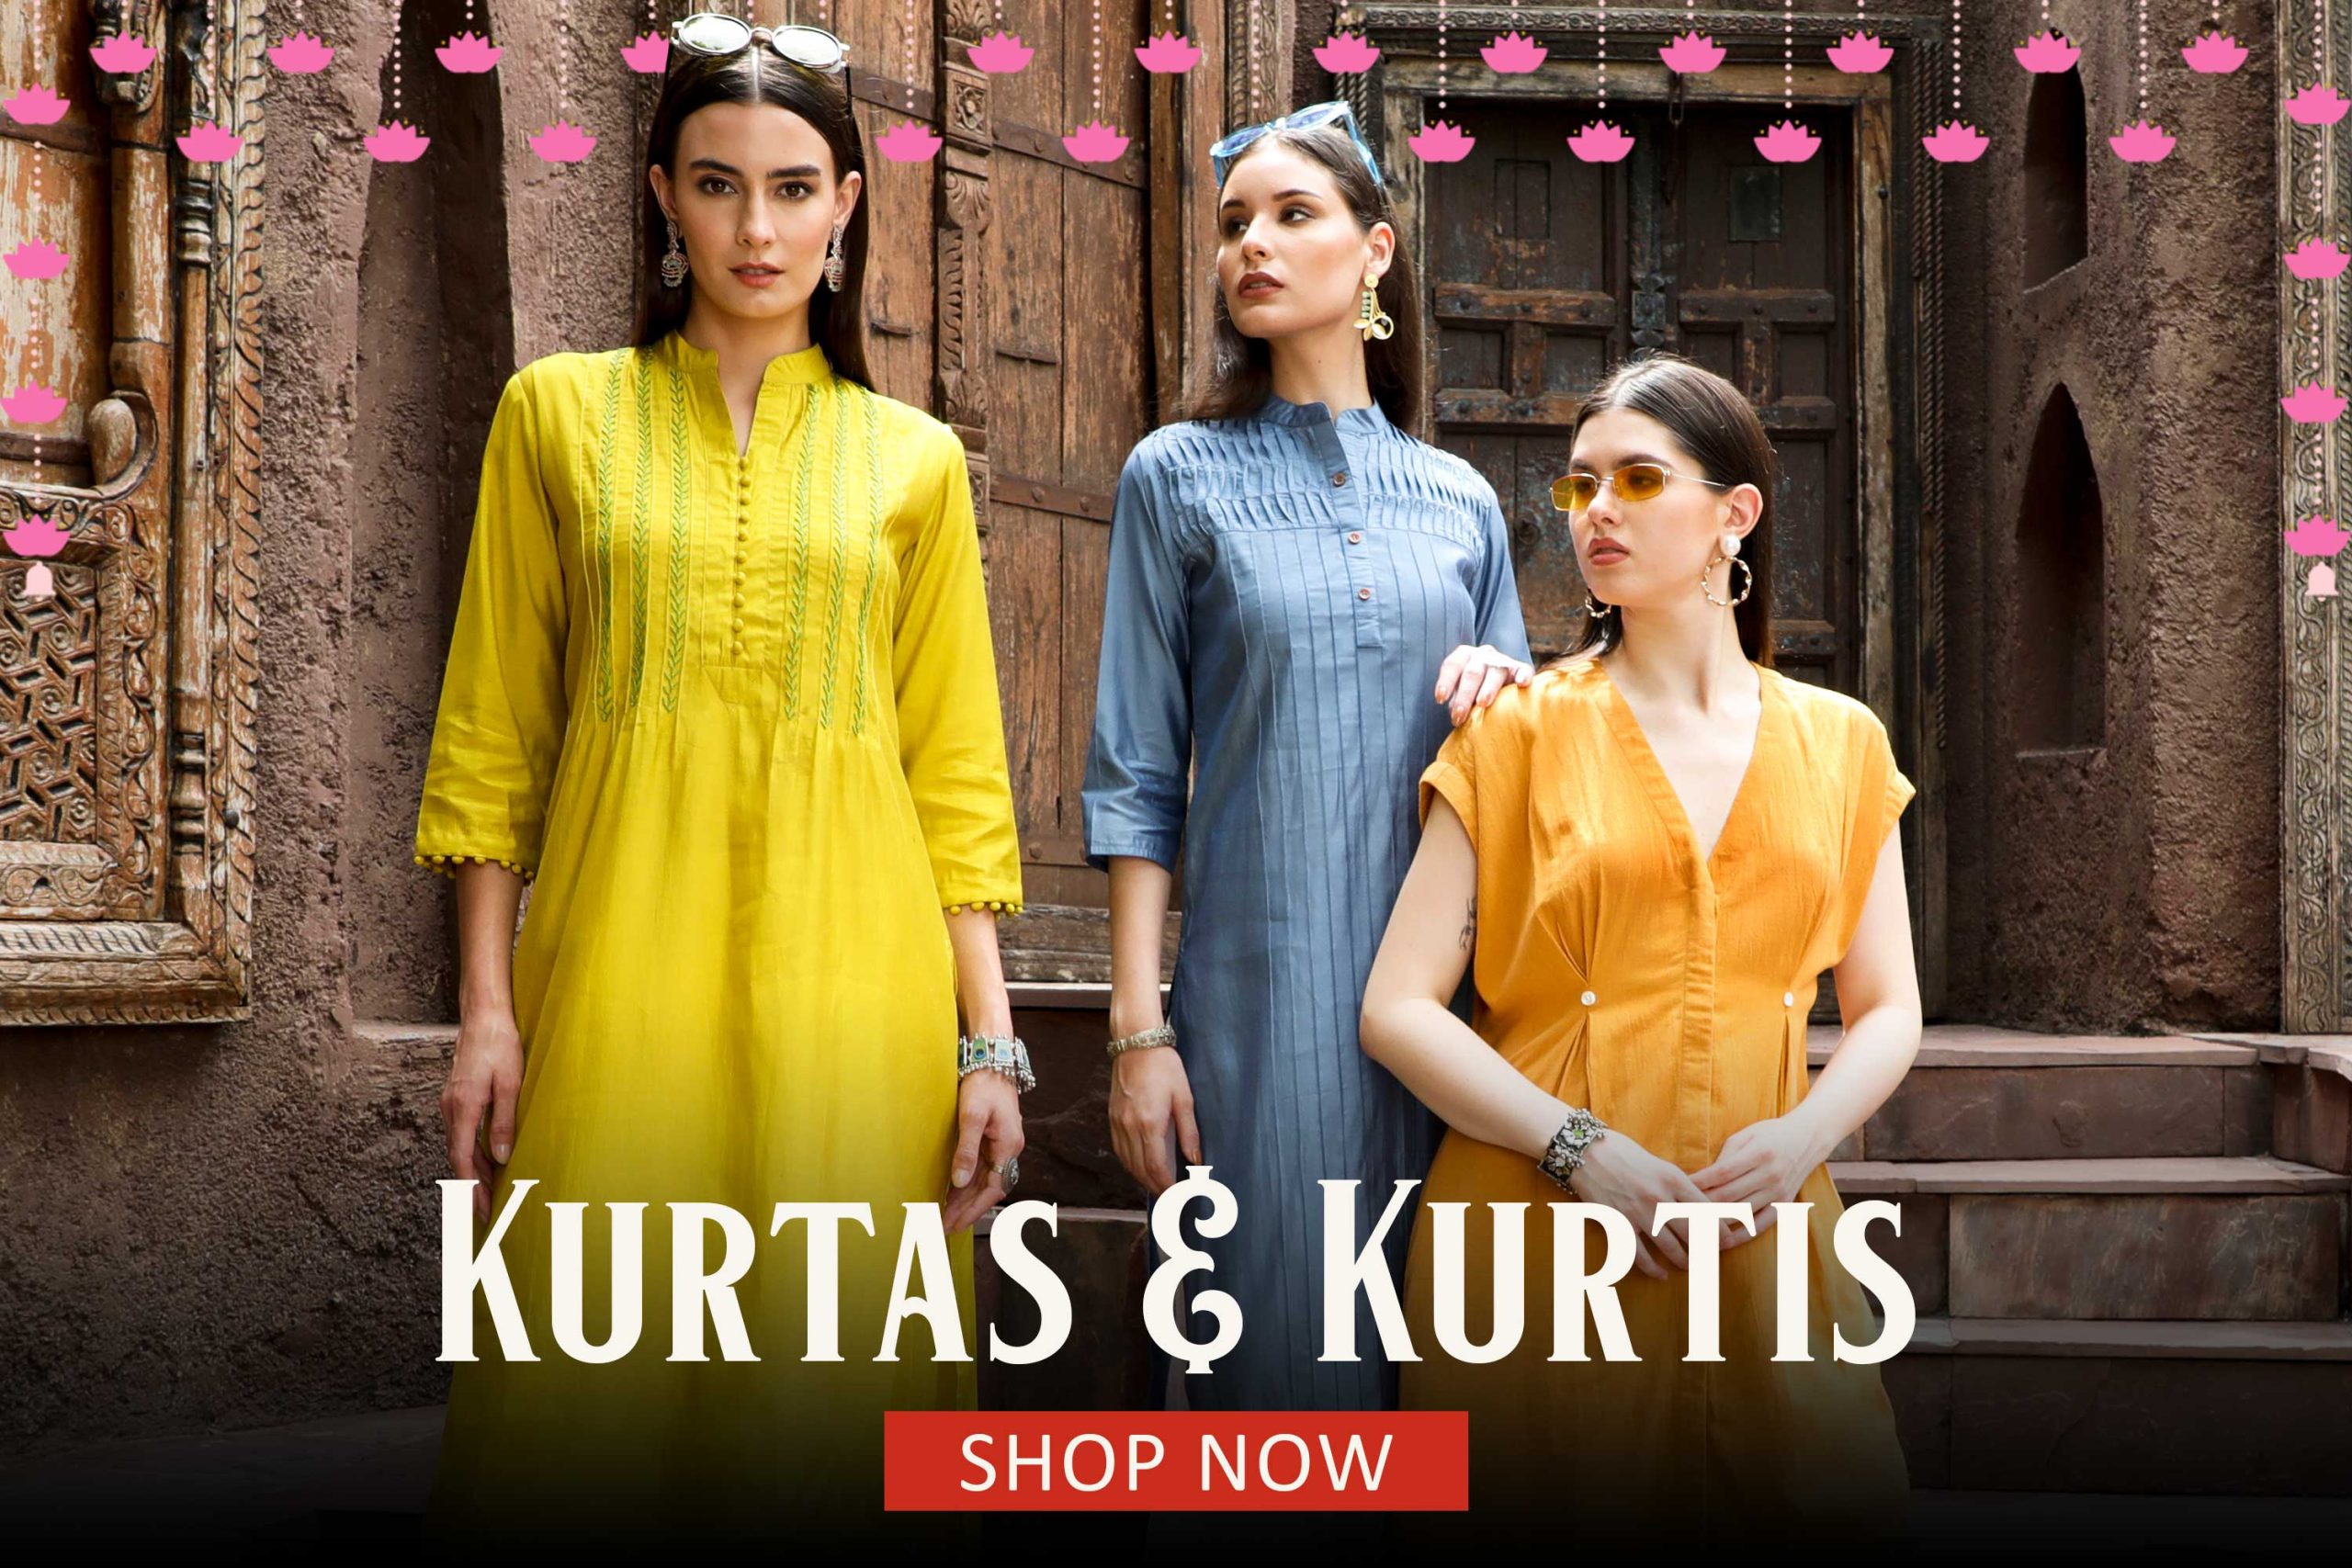 Wholesaler And Supplier Of Indian Women Clothing In Surat